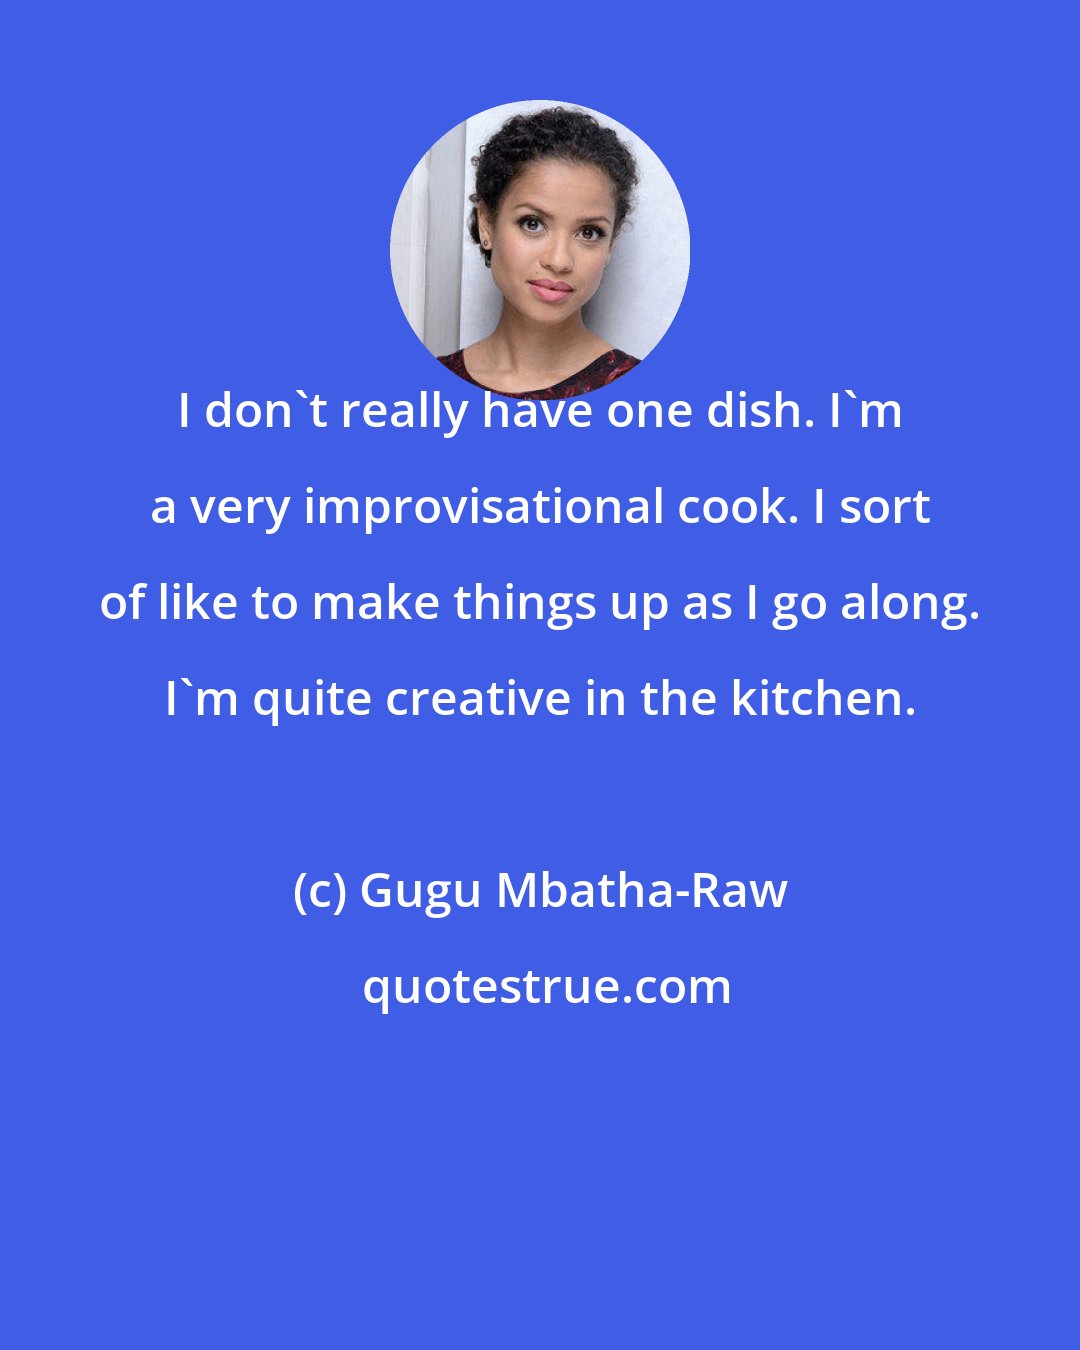 Gugu Mbatha-Raw: I don't really have one dish. I'm a very improvisational cook. I sort of like to make things up as I go along. I'm quite creative in the kitchen.